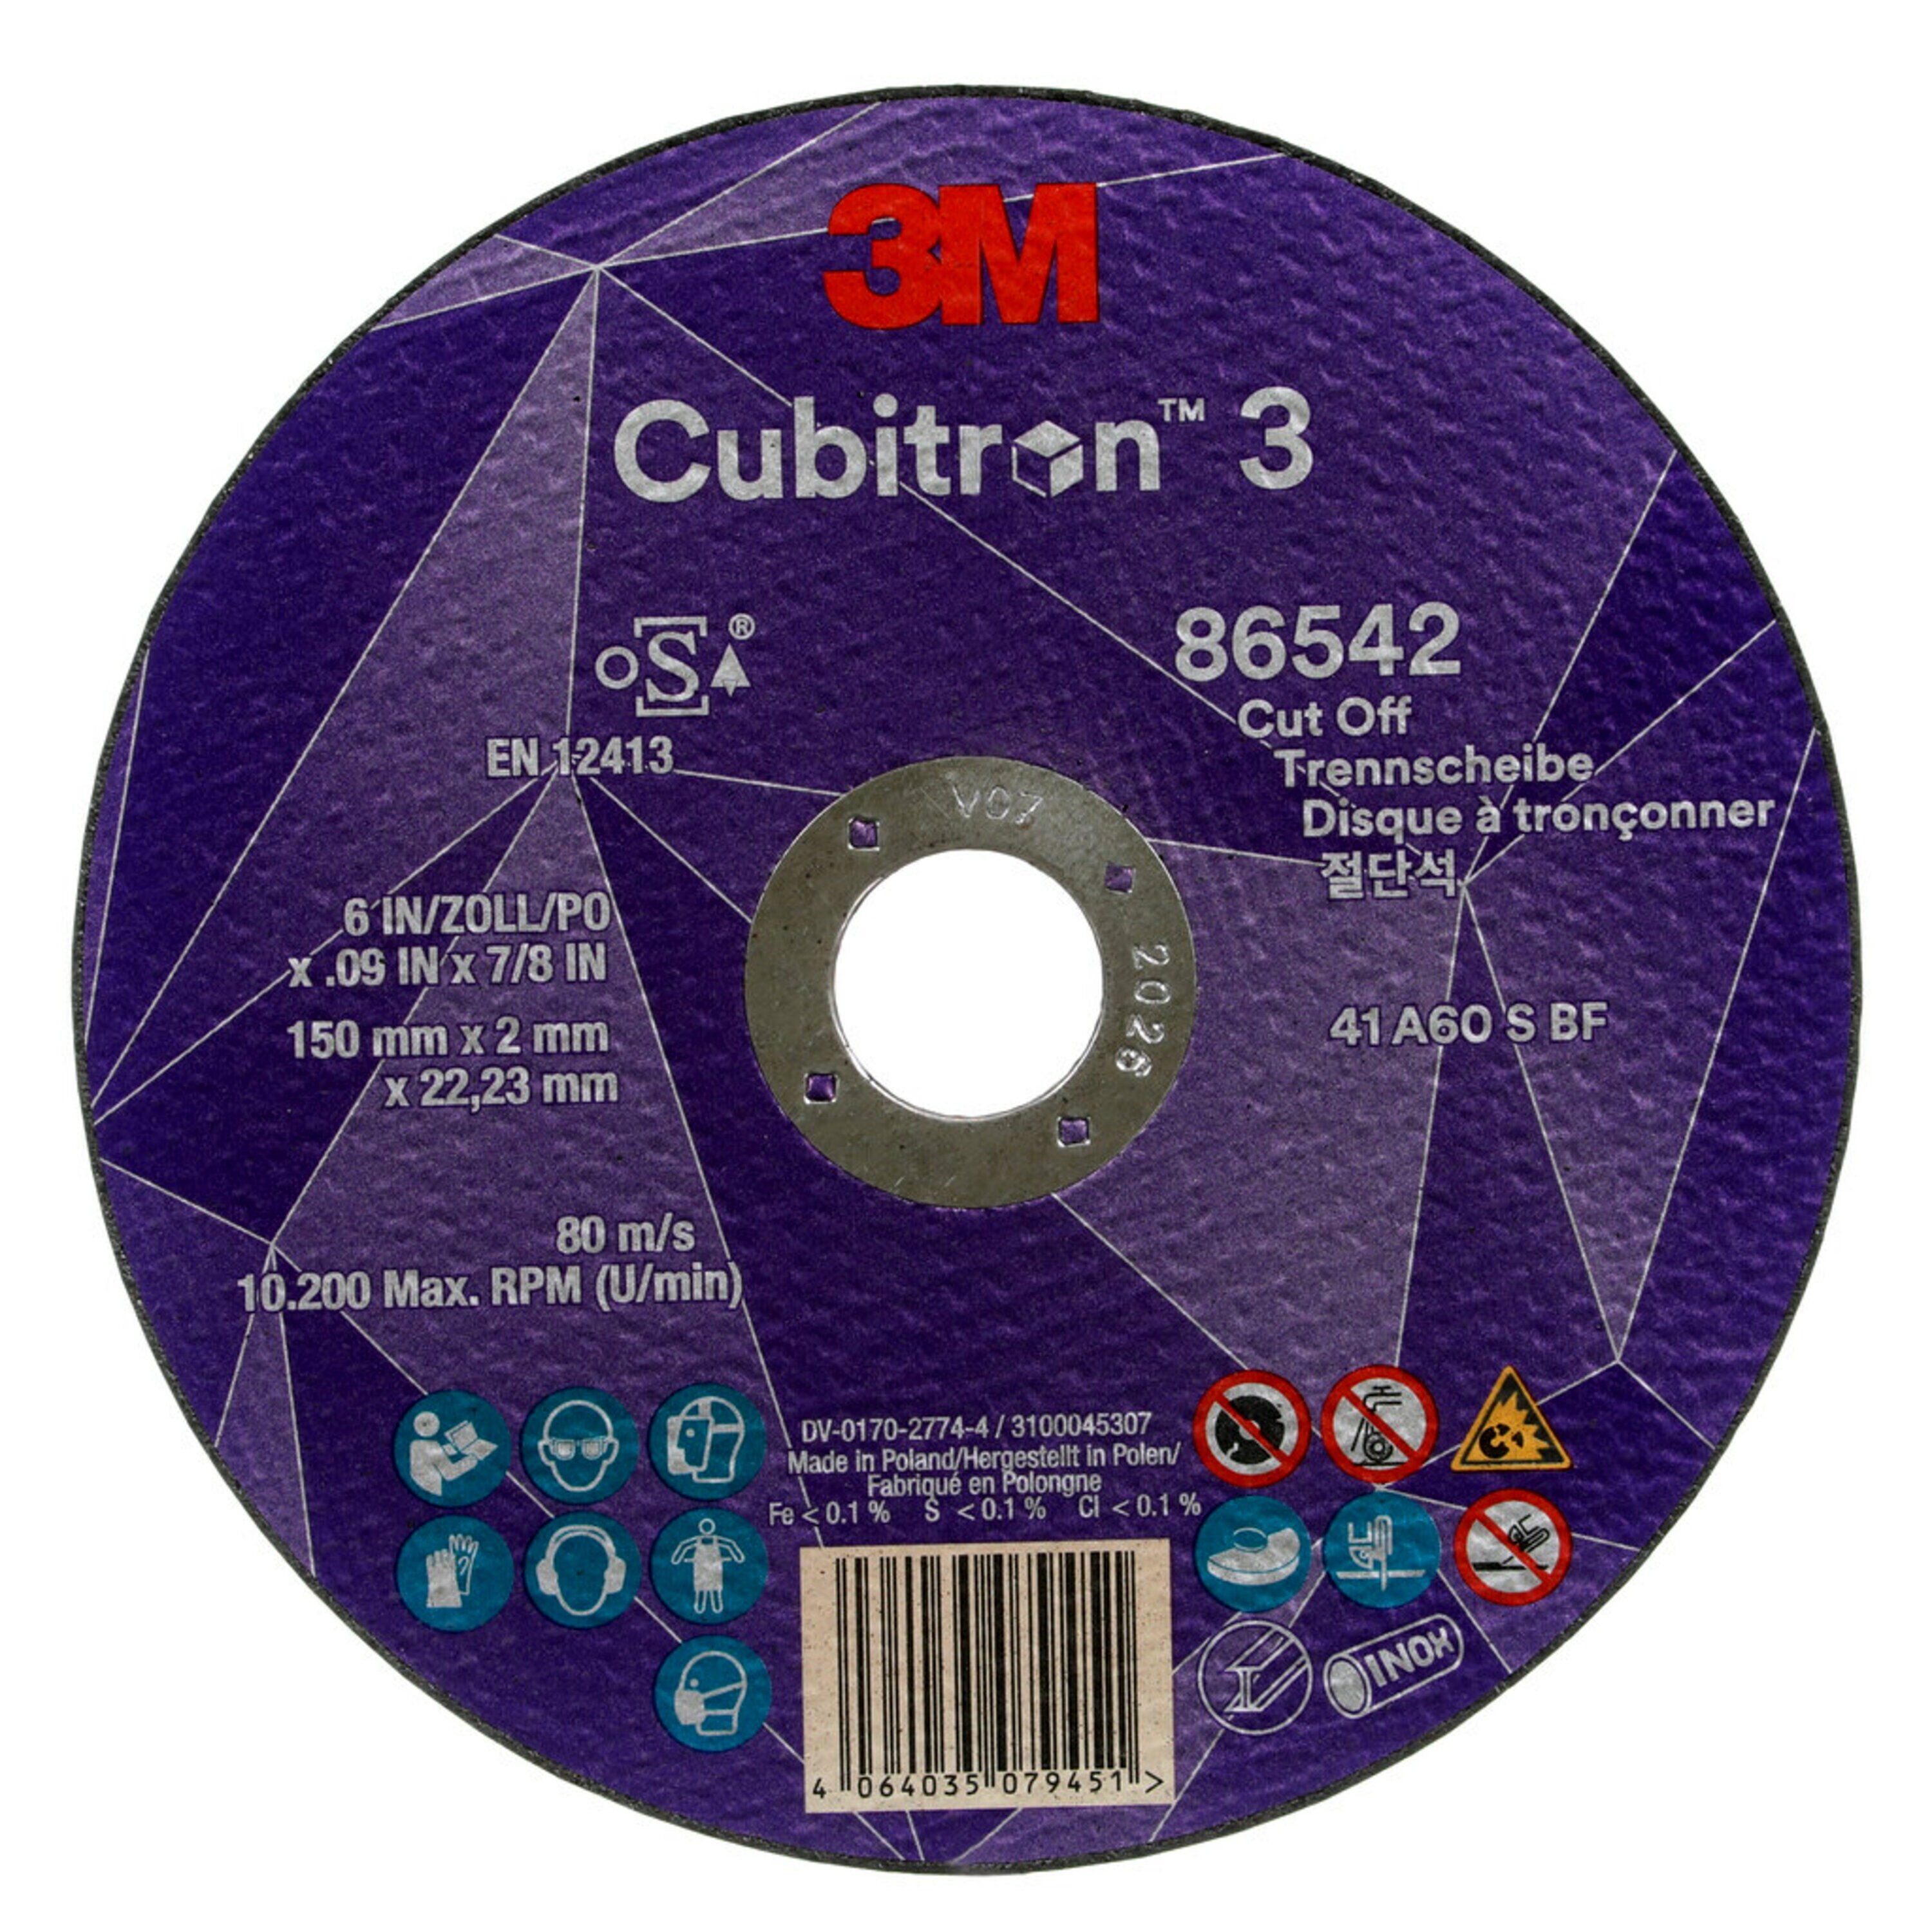 3M Cubitron 3, 150 mm, 2 mm, 22,23 mm, 60+, tipo 41 #86542